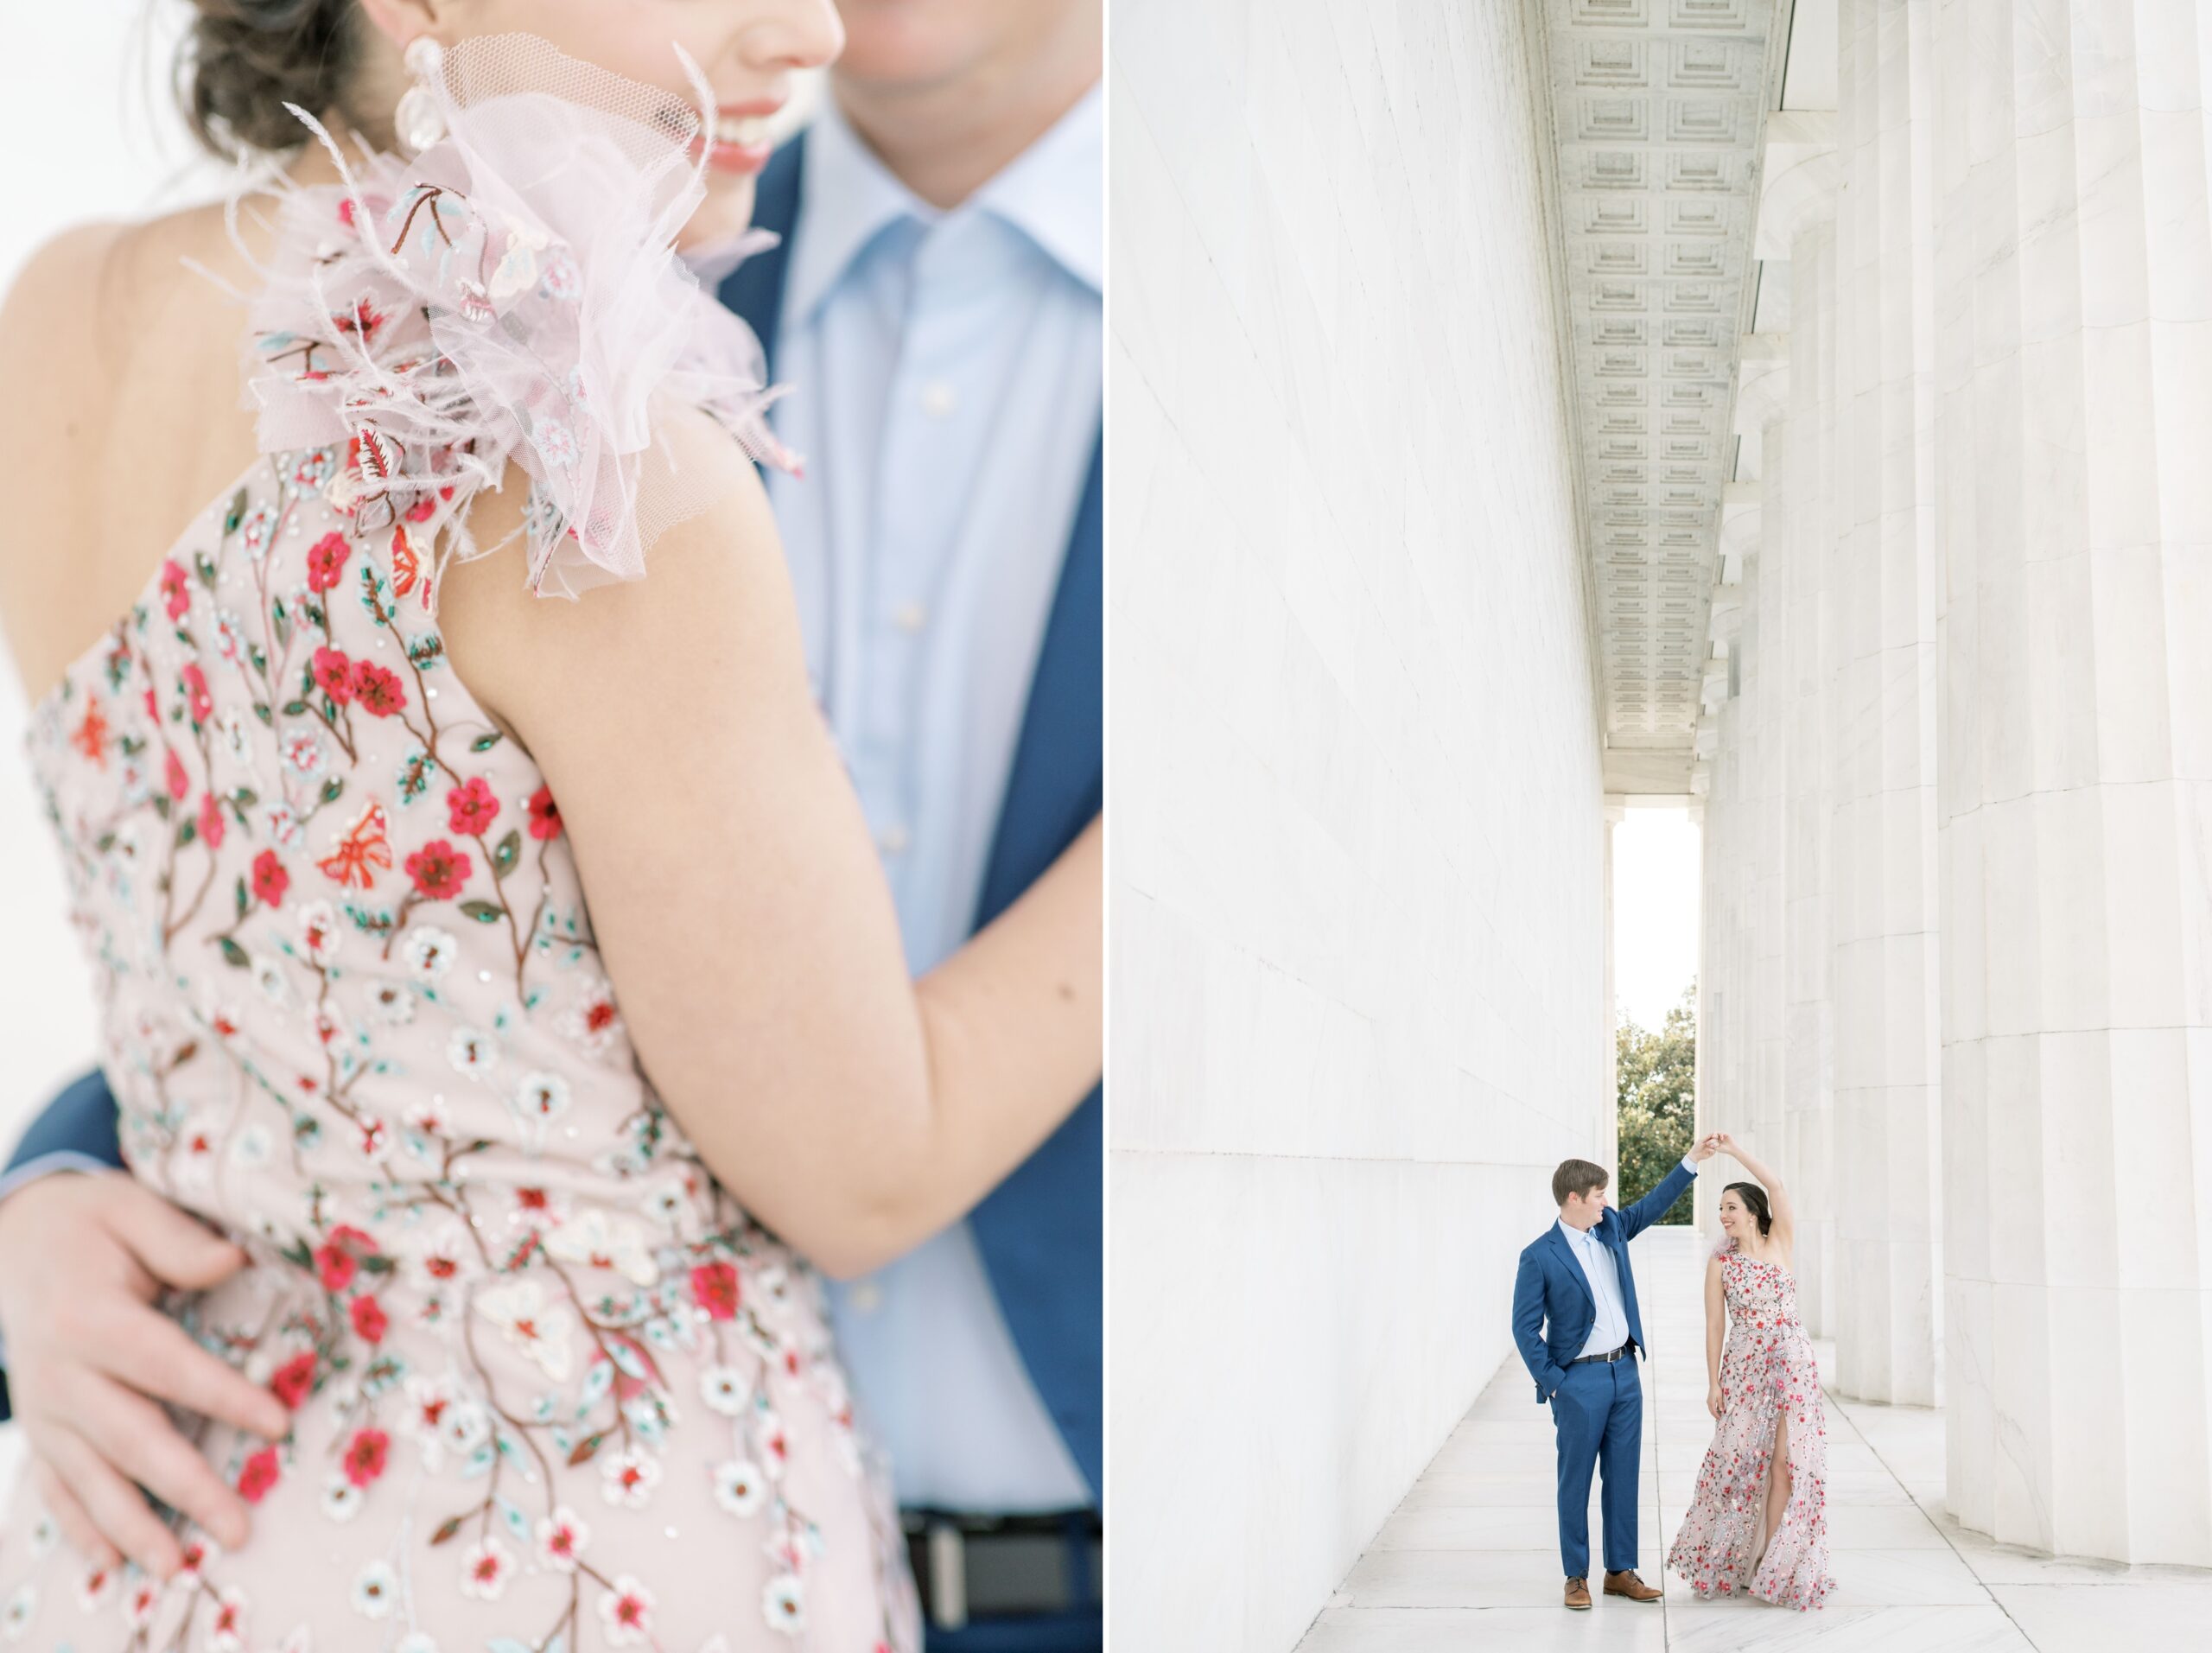 Lincoln Memorial engagement photos at sunrise in Washington, DC